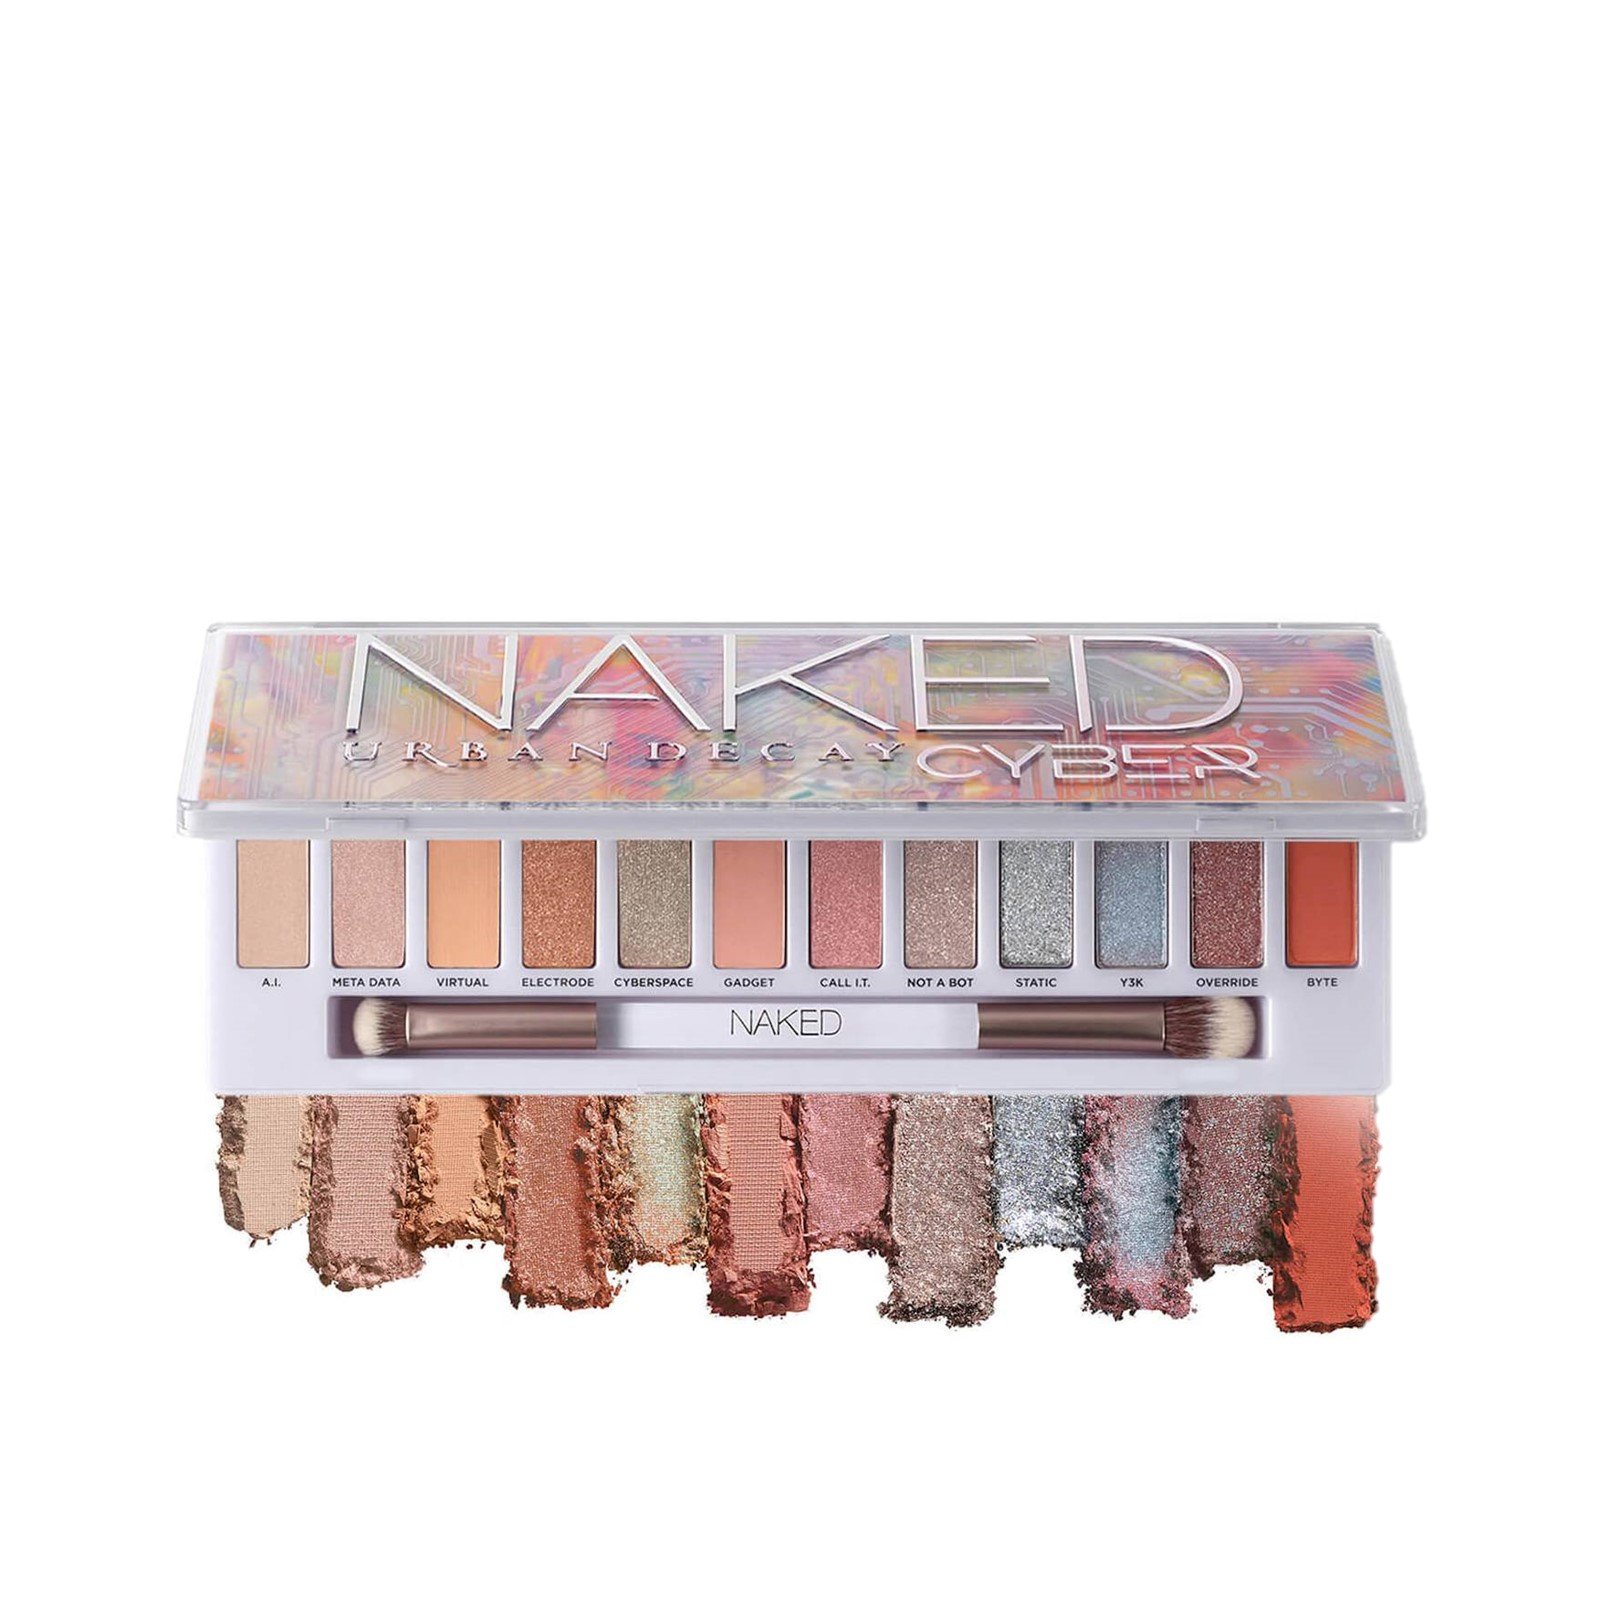 Glossy Pop Newsletter: A 10-year-old Urban Decay eyeshadow is back, thanks  to Gen Z - Glossy